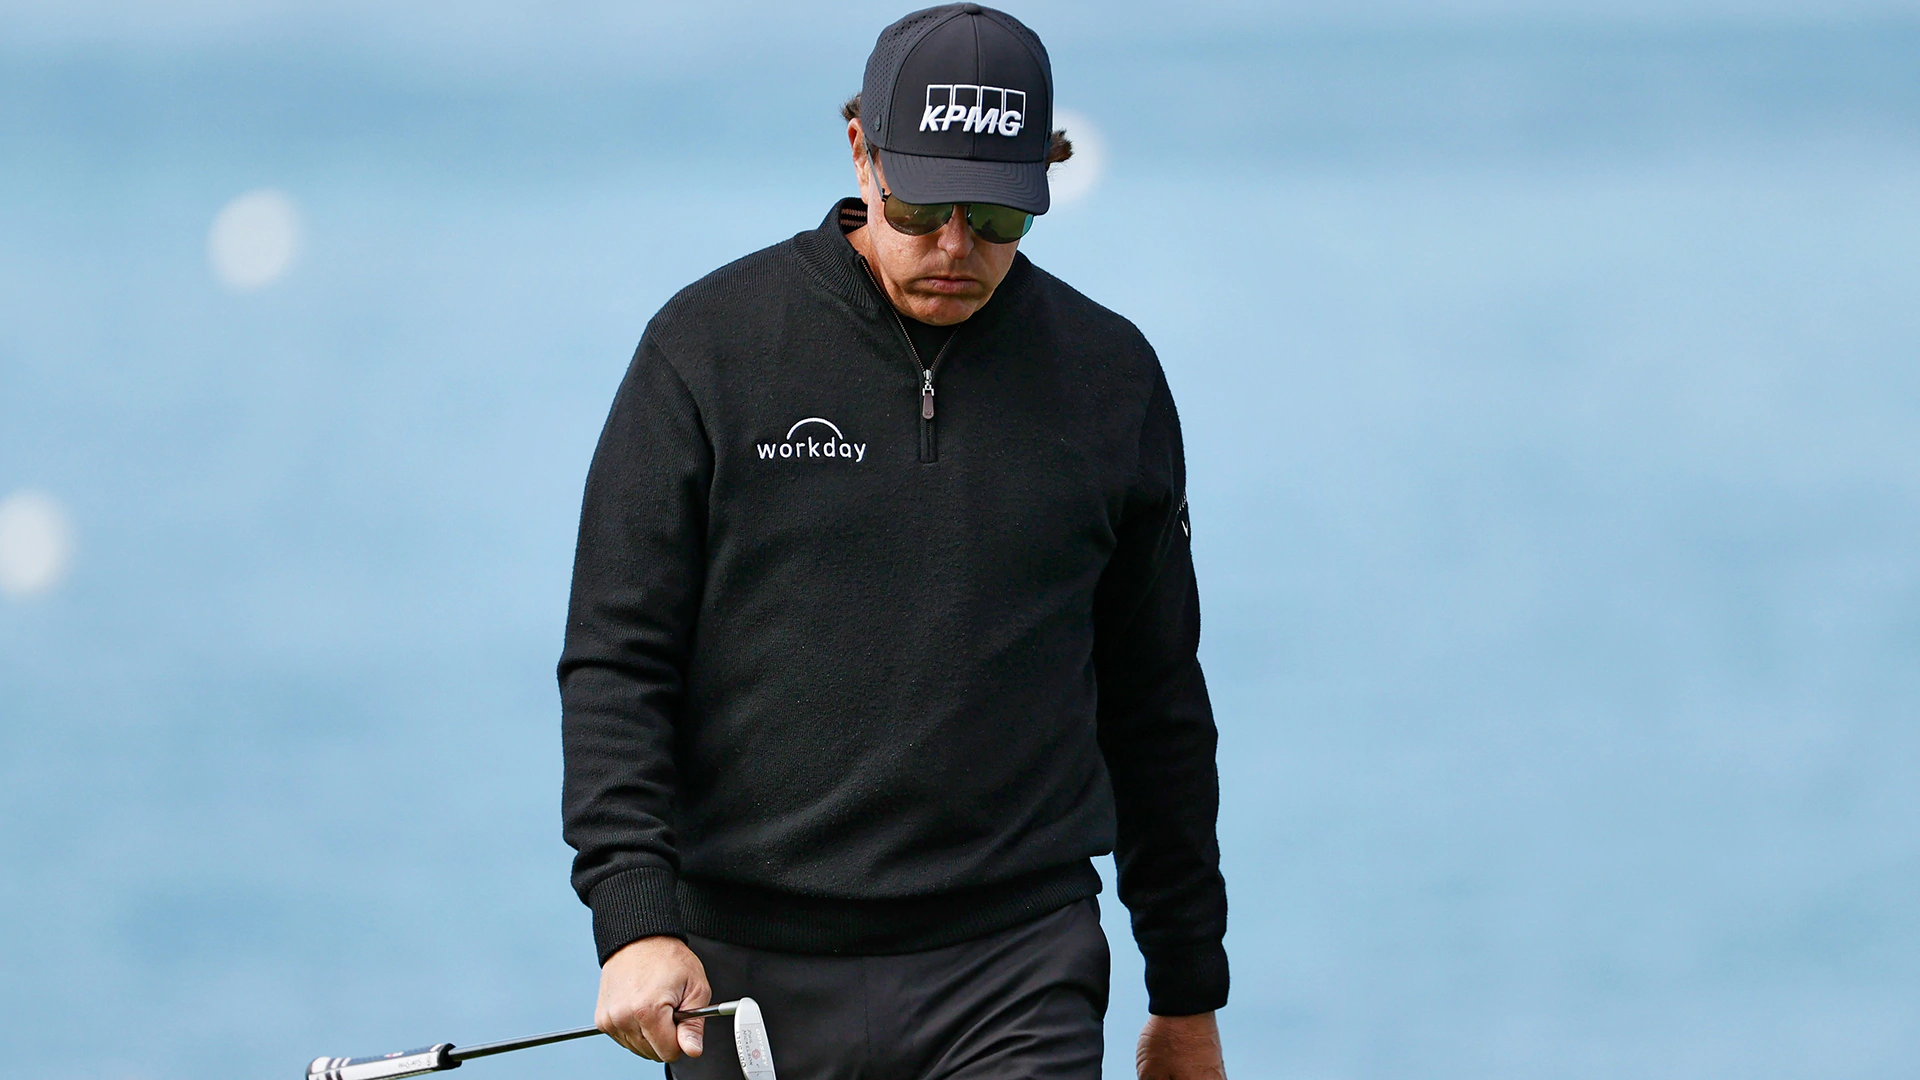 Phil Mickelson ties worst score at Pebble Beach, misses first Pro-Am cut since 2008